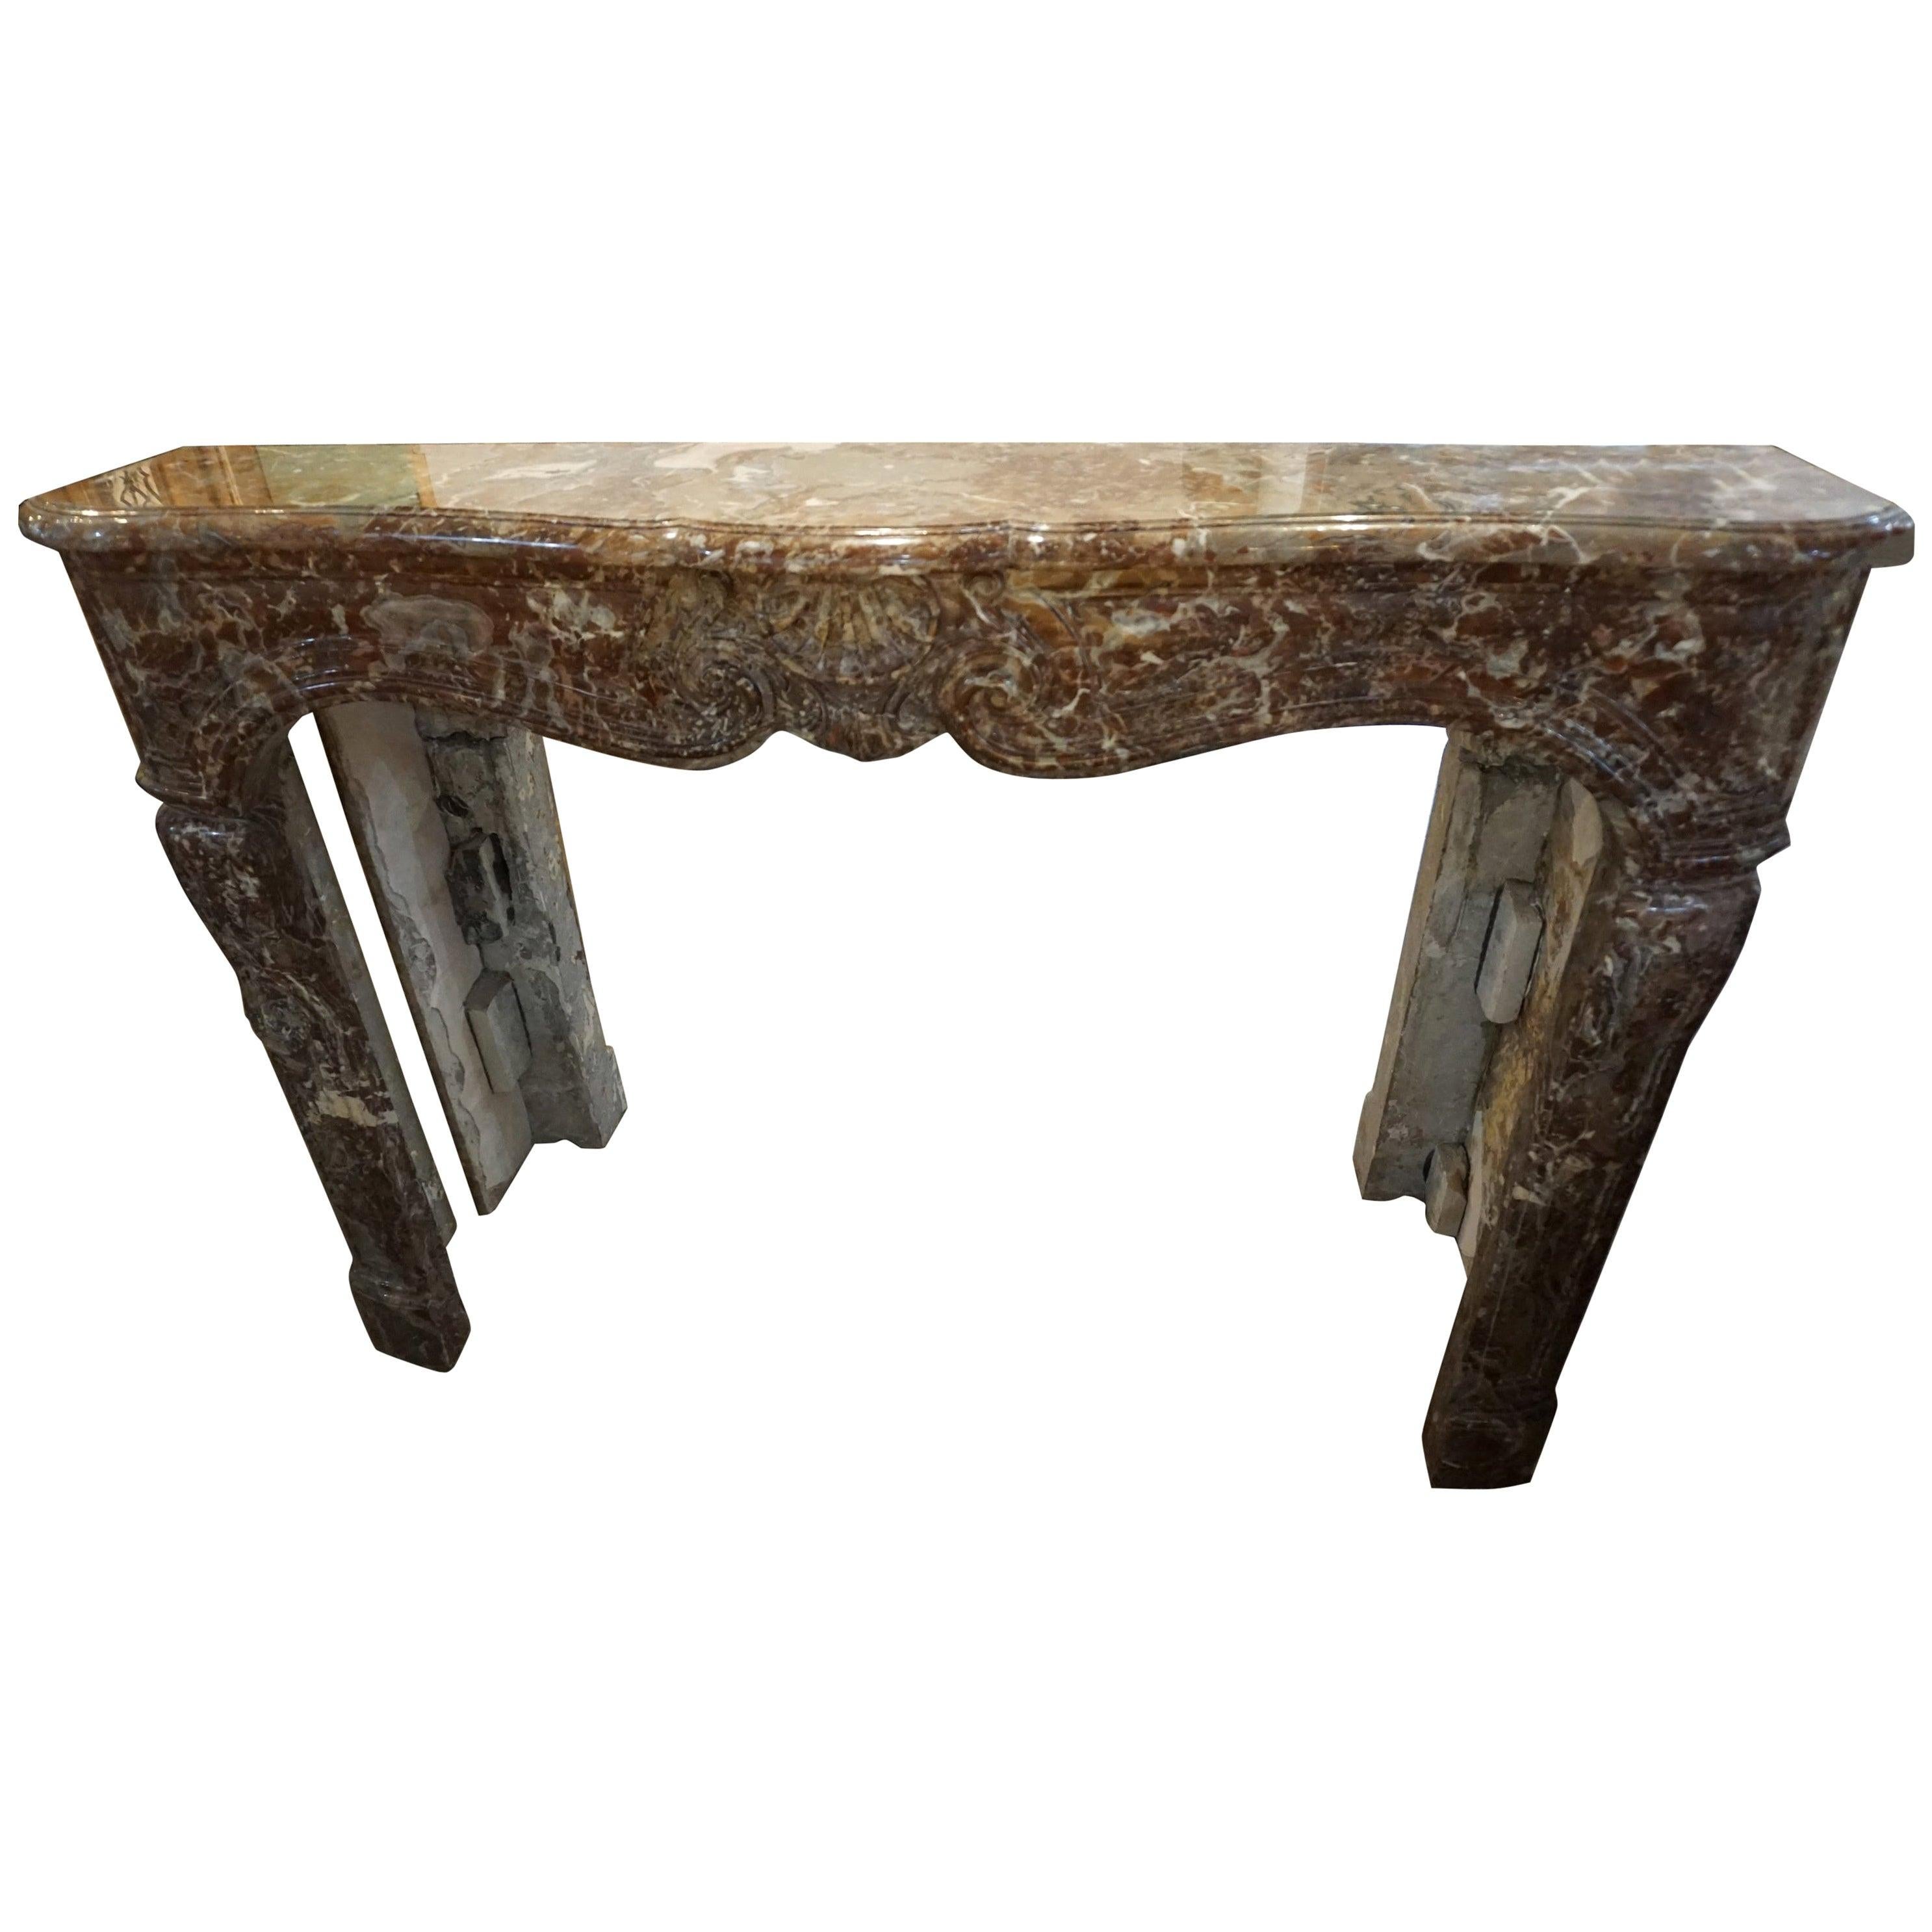 19th Century Regence Style Marble Mantel For Sale